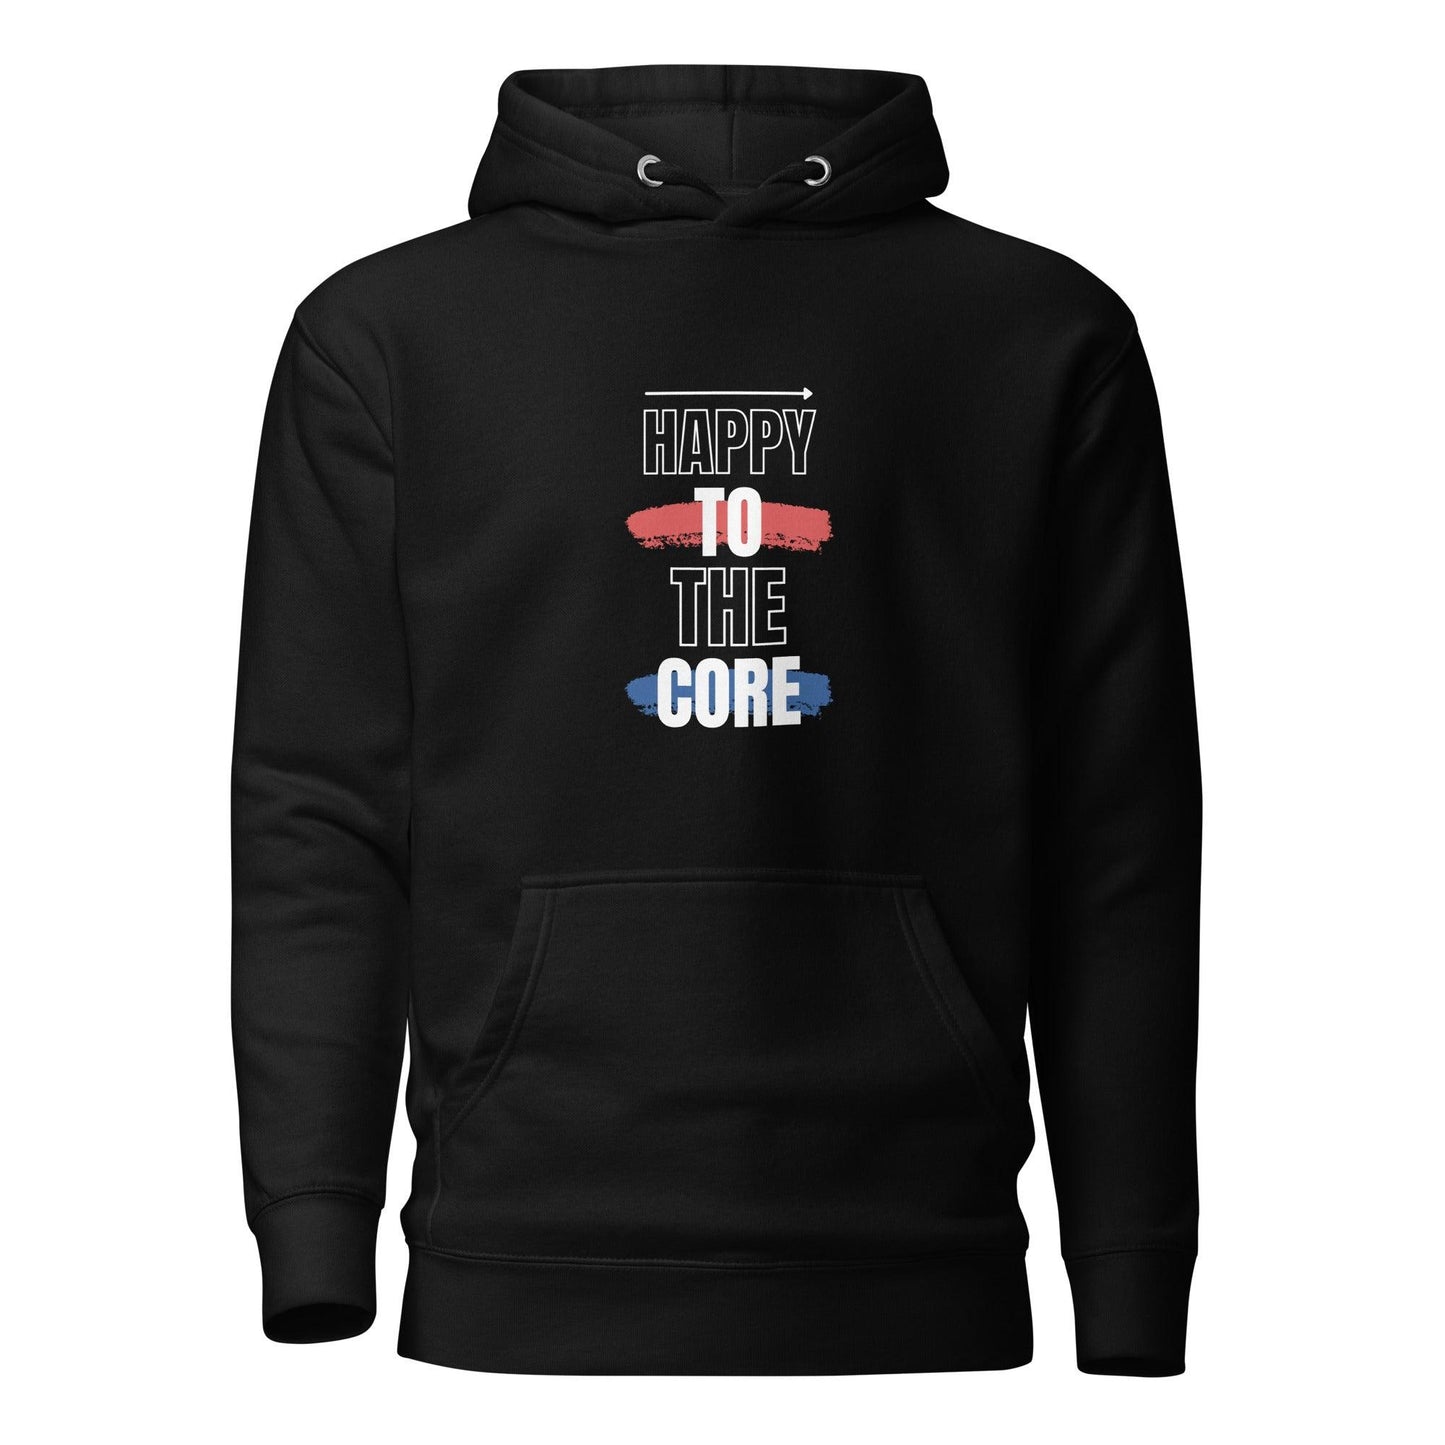 Happy To The Core, Premium Unisex Hoodie | Positive Affirmation Clothing - Affirm Effect